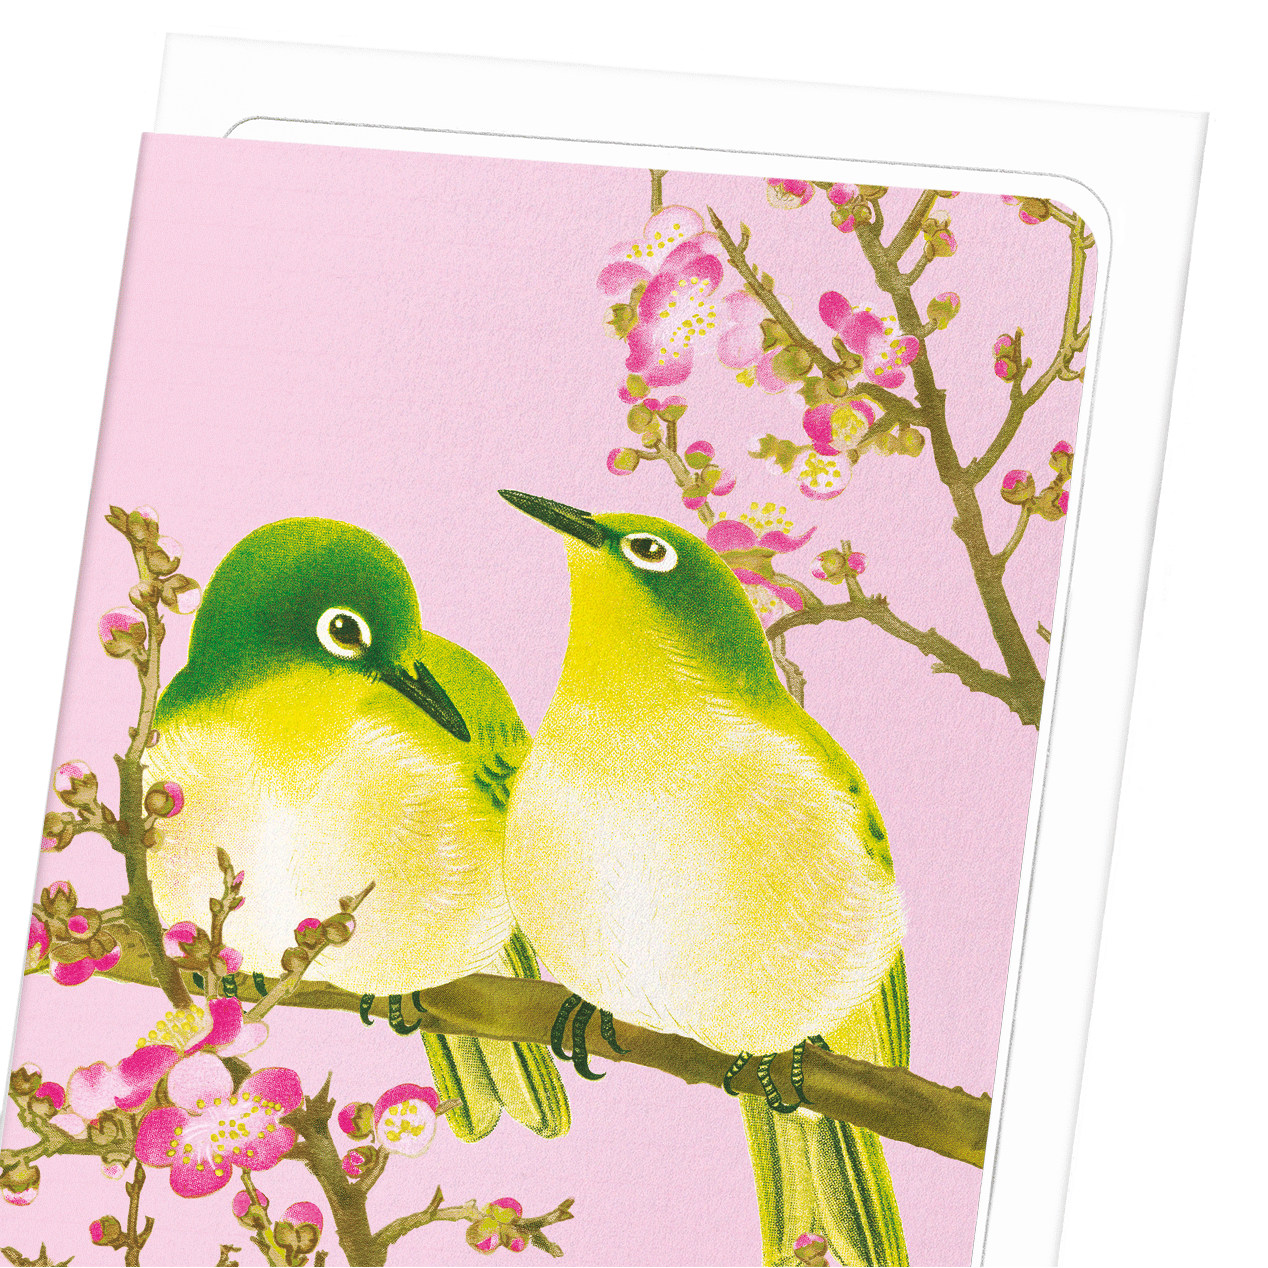 WARBLING WHITE-EYE WITH PLUM BLOSSOMS (C.1930)